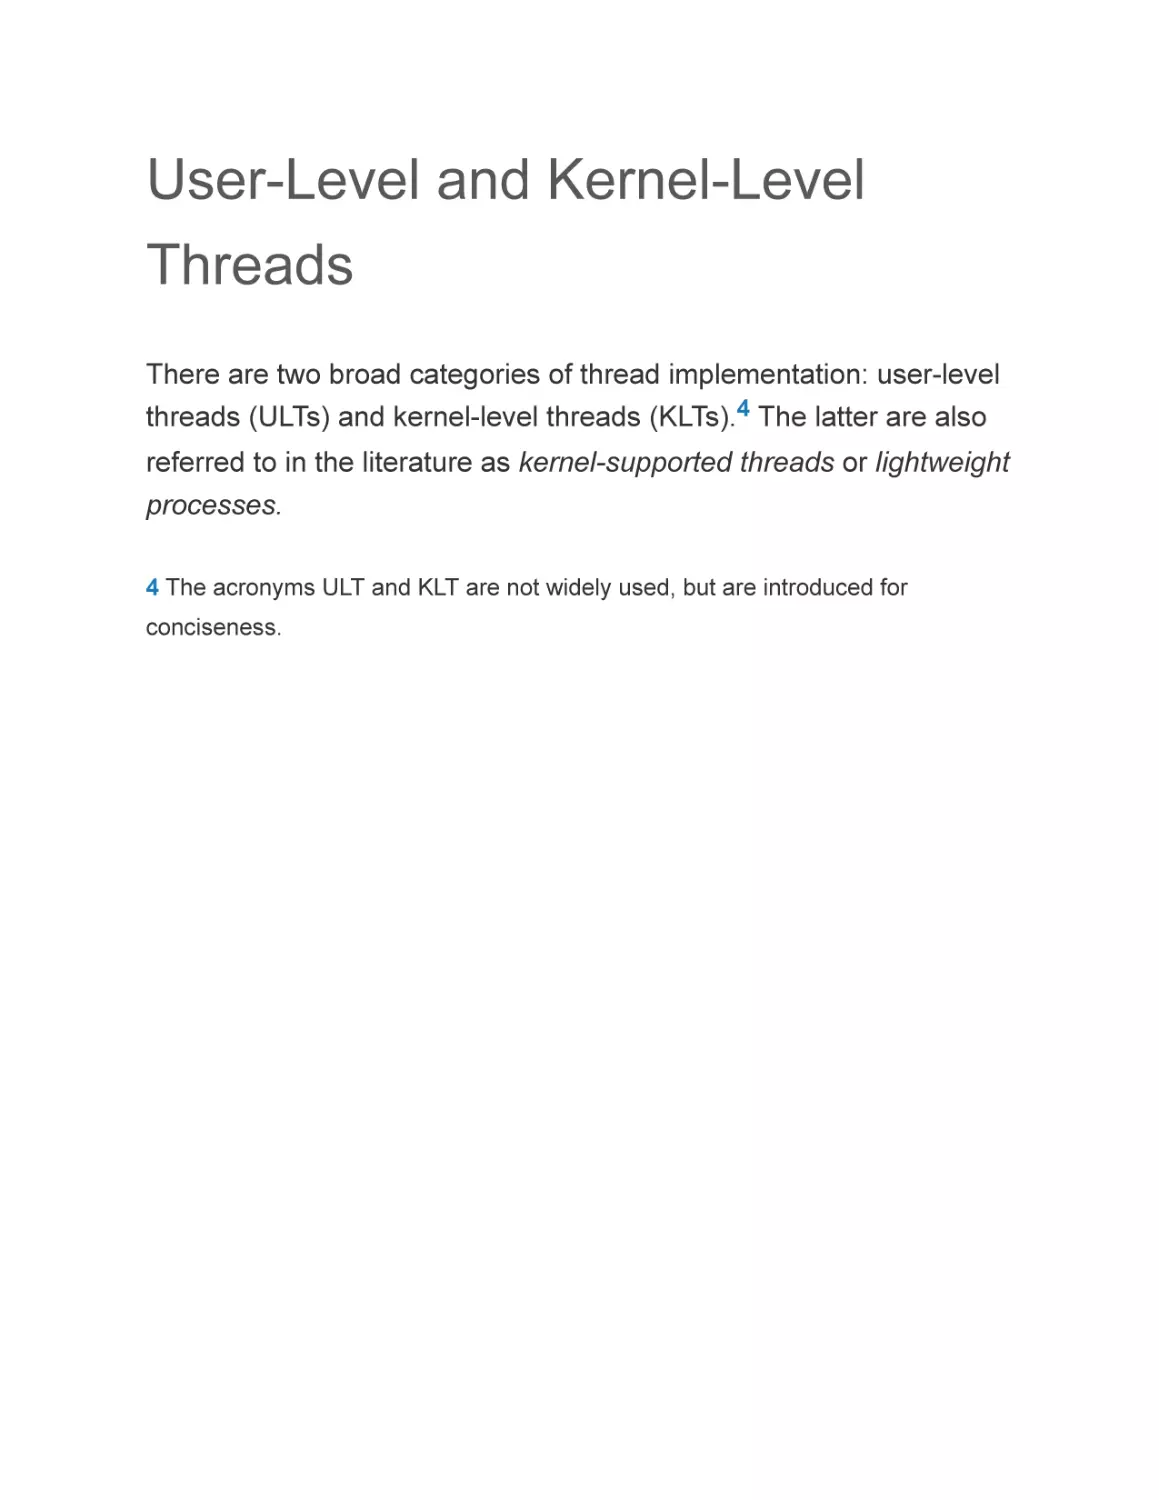 User-Level and Kernel-Level Threads